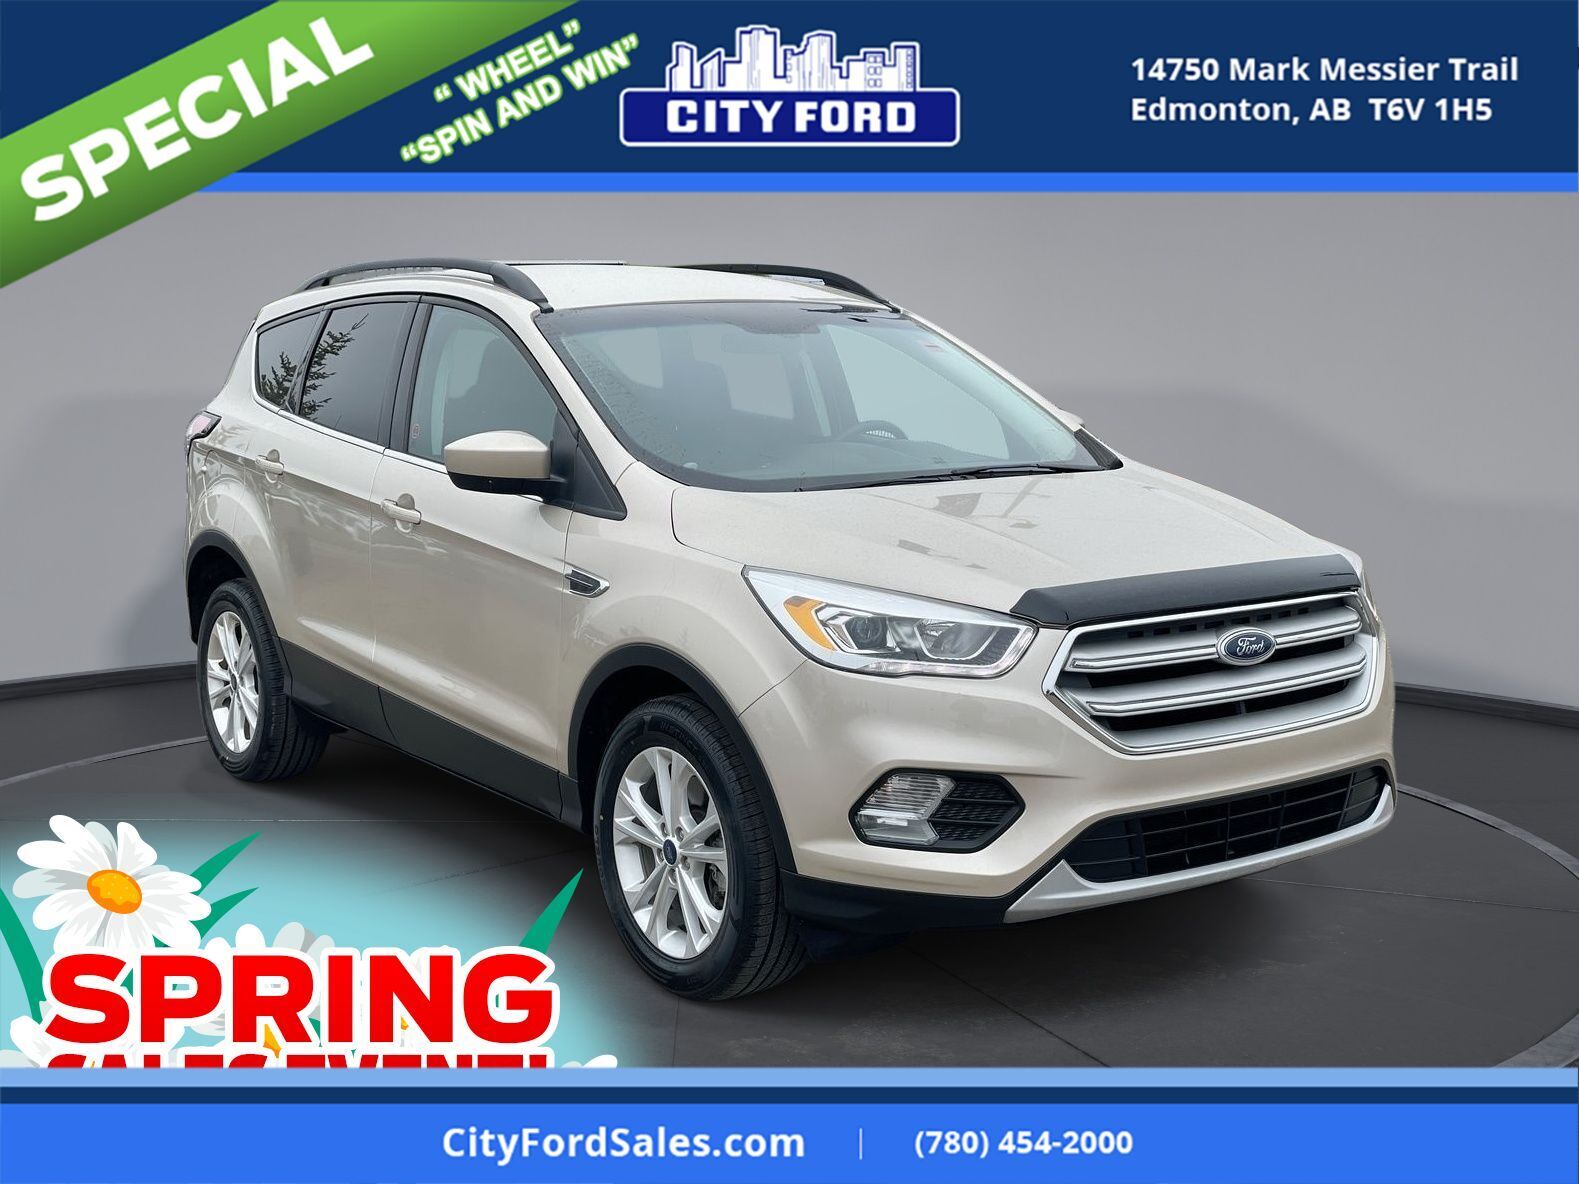 2018 Ford Escape SEL 4x4 | HEATED LEATHER SEATS